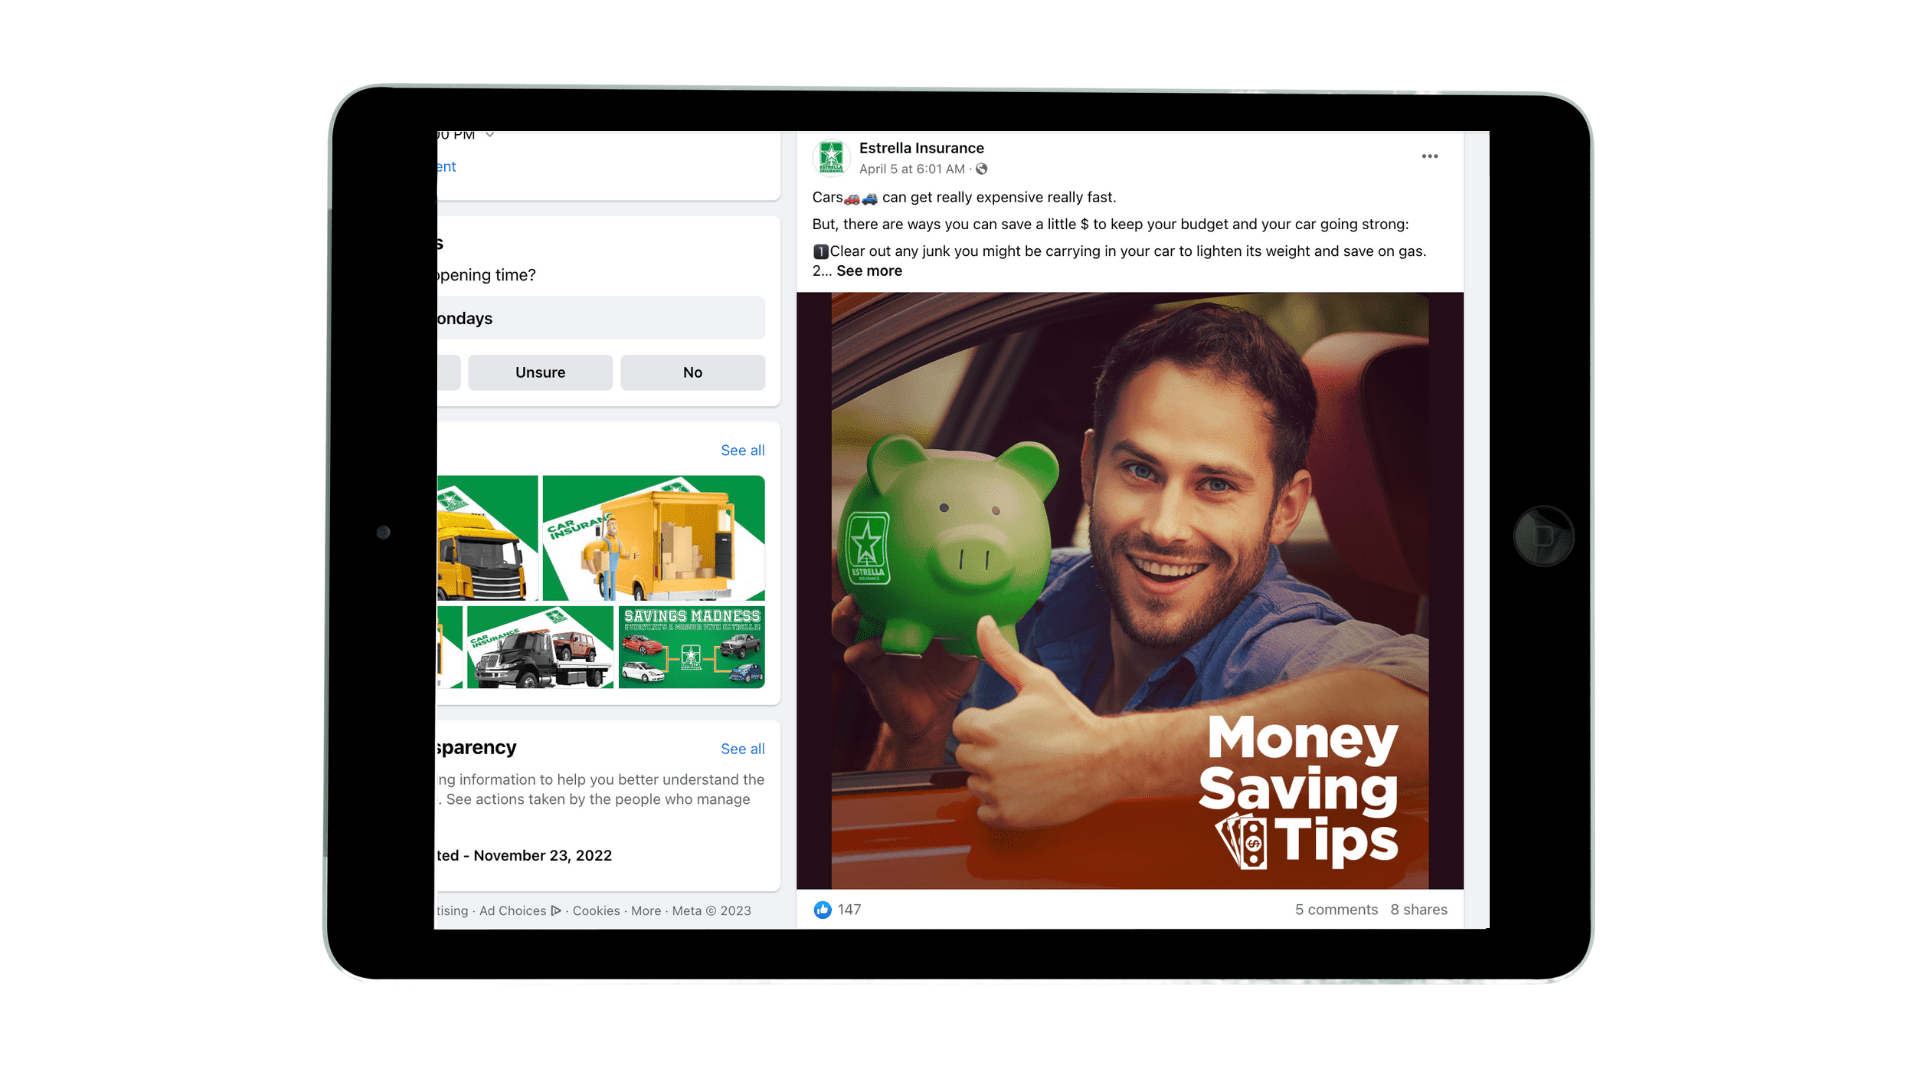 A picture of a young man giving a thumbs up inside a car and holding a green piggy bank with a Facebook caption written above and Money Saving Tips in white in the bottom right corner.